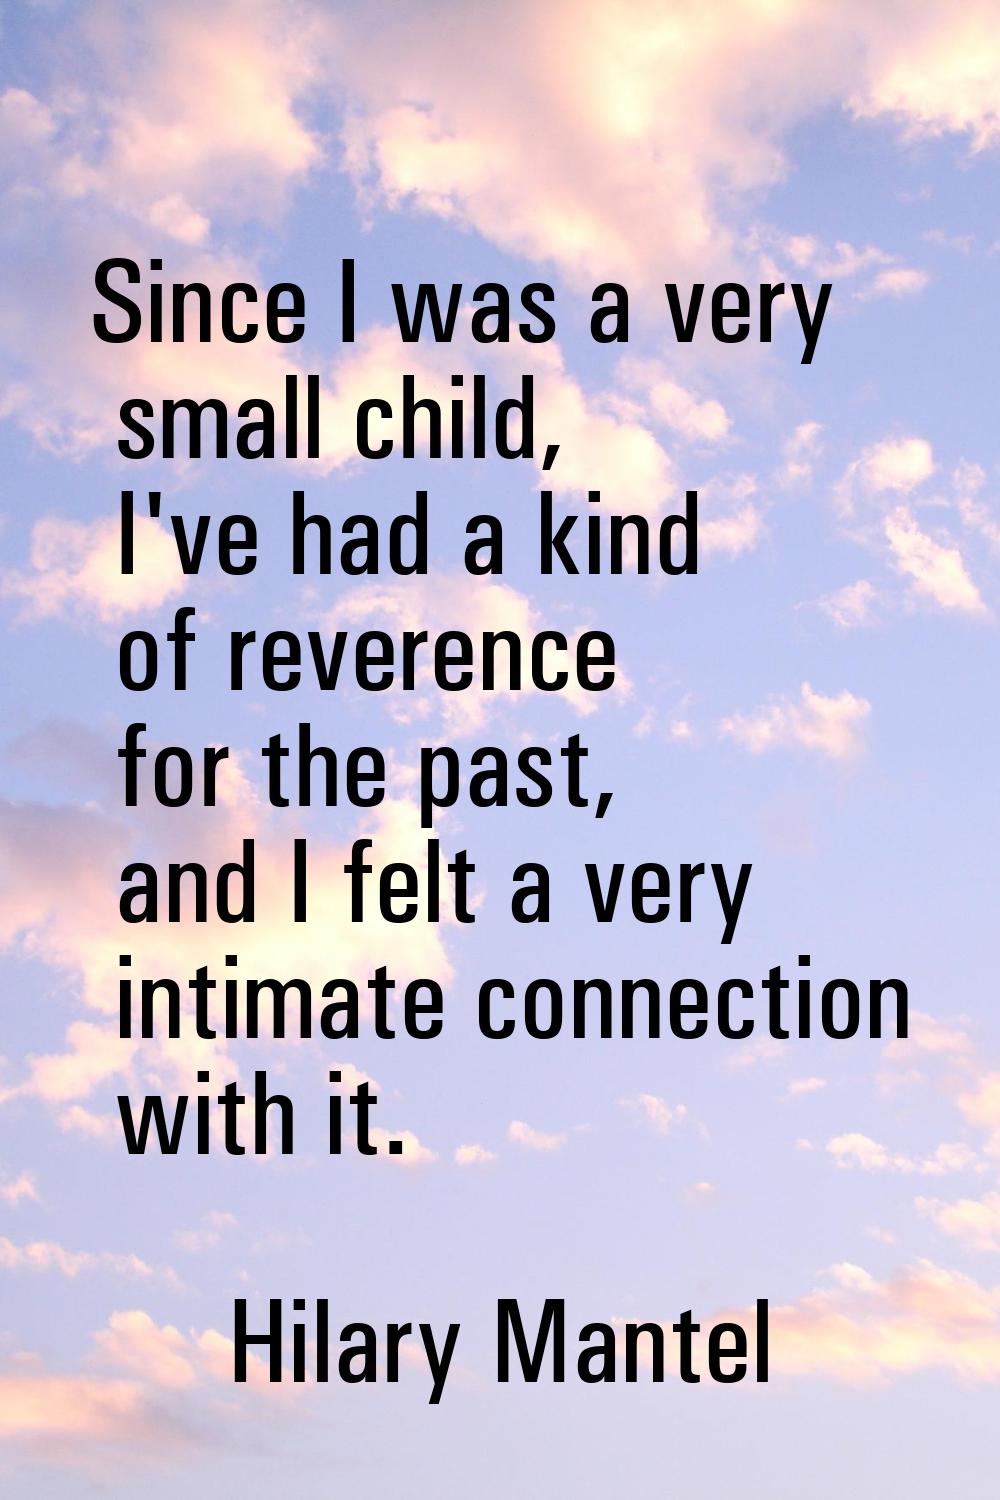 Since I was a very small child, I've had a kind of reverence for the past, and I felt a very intima